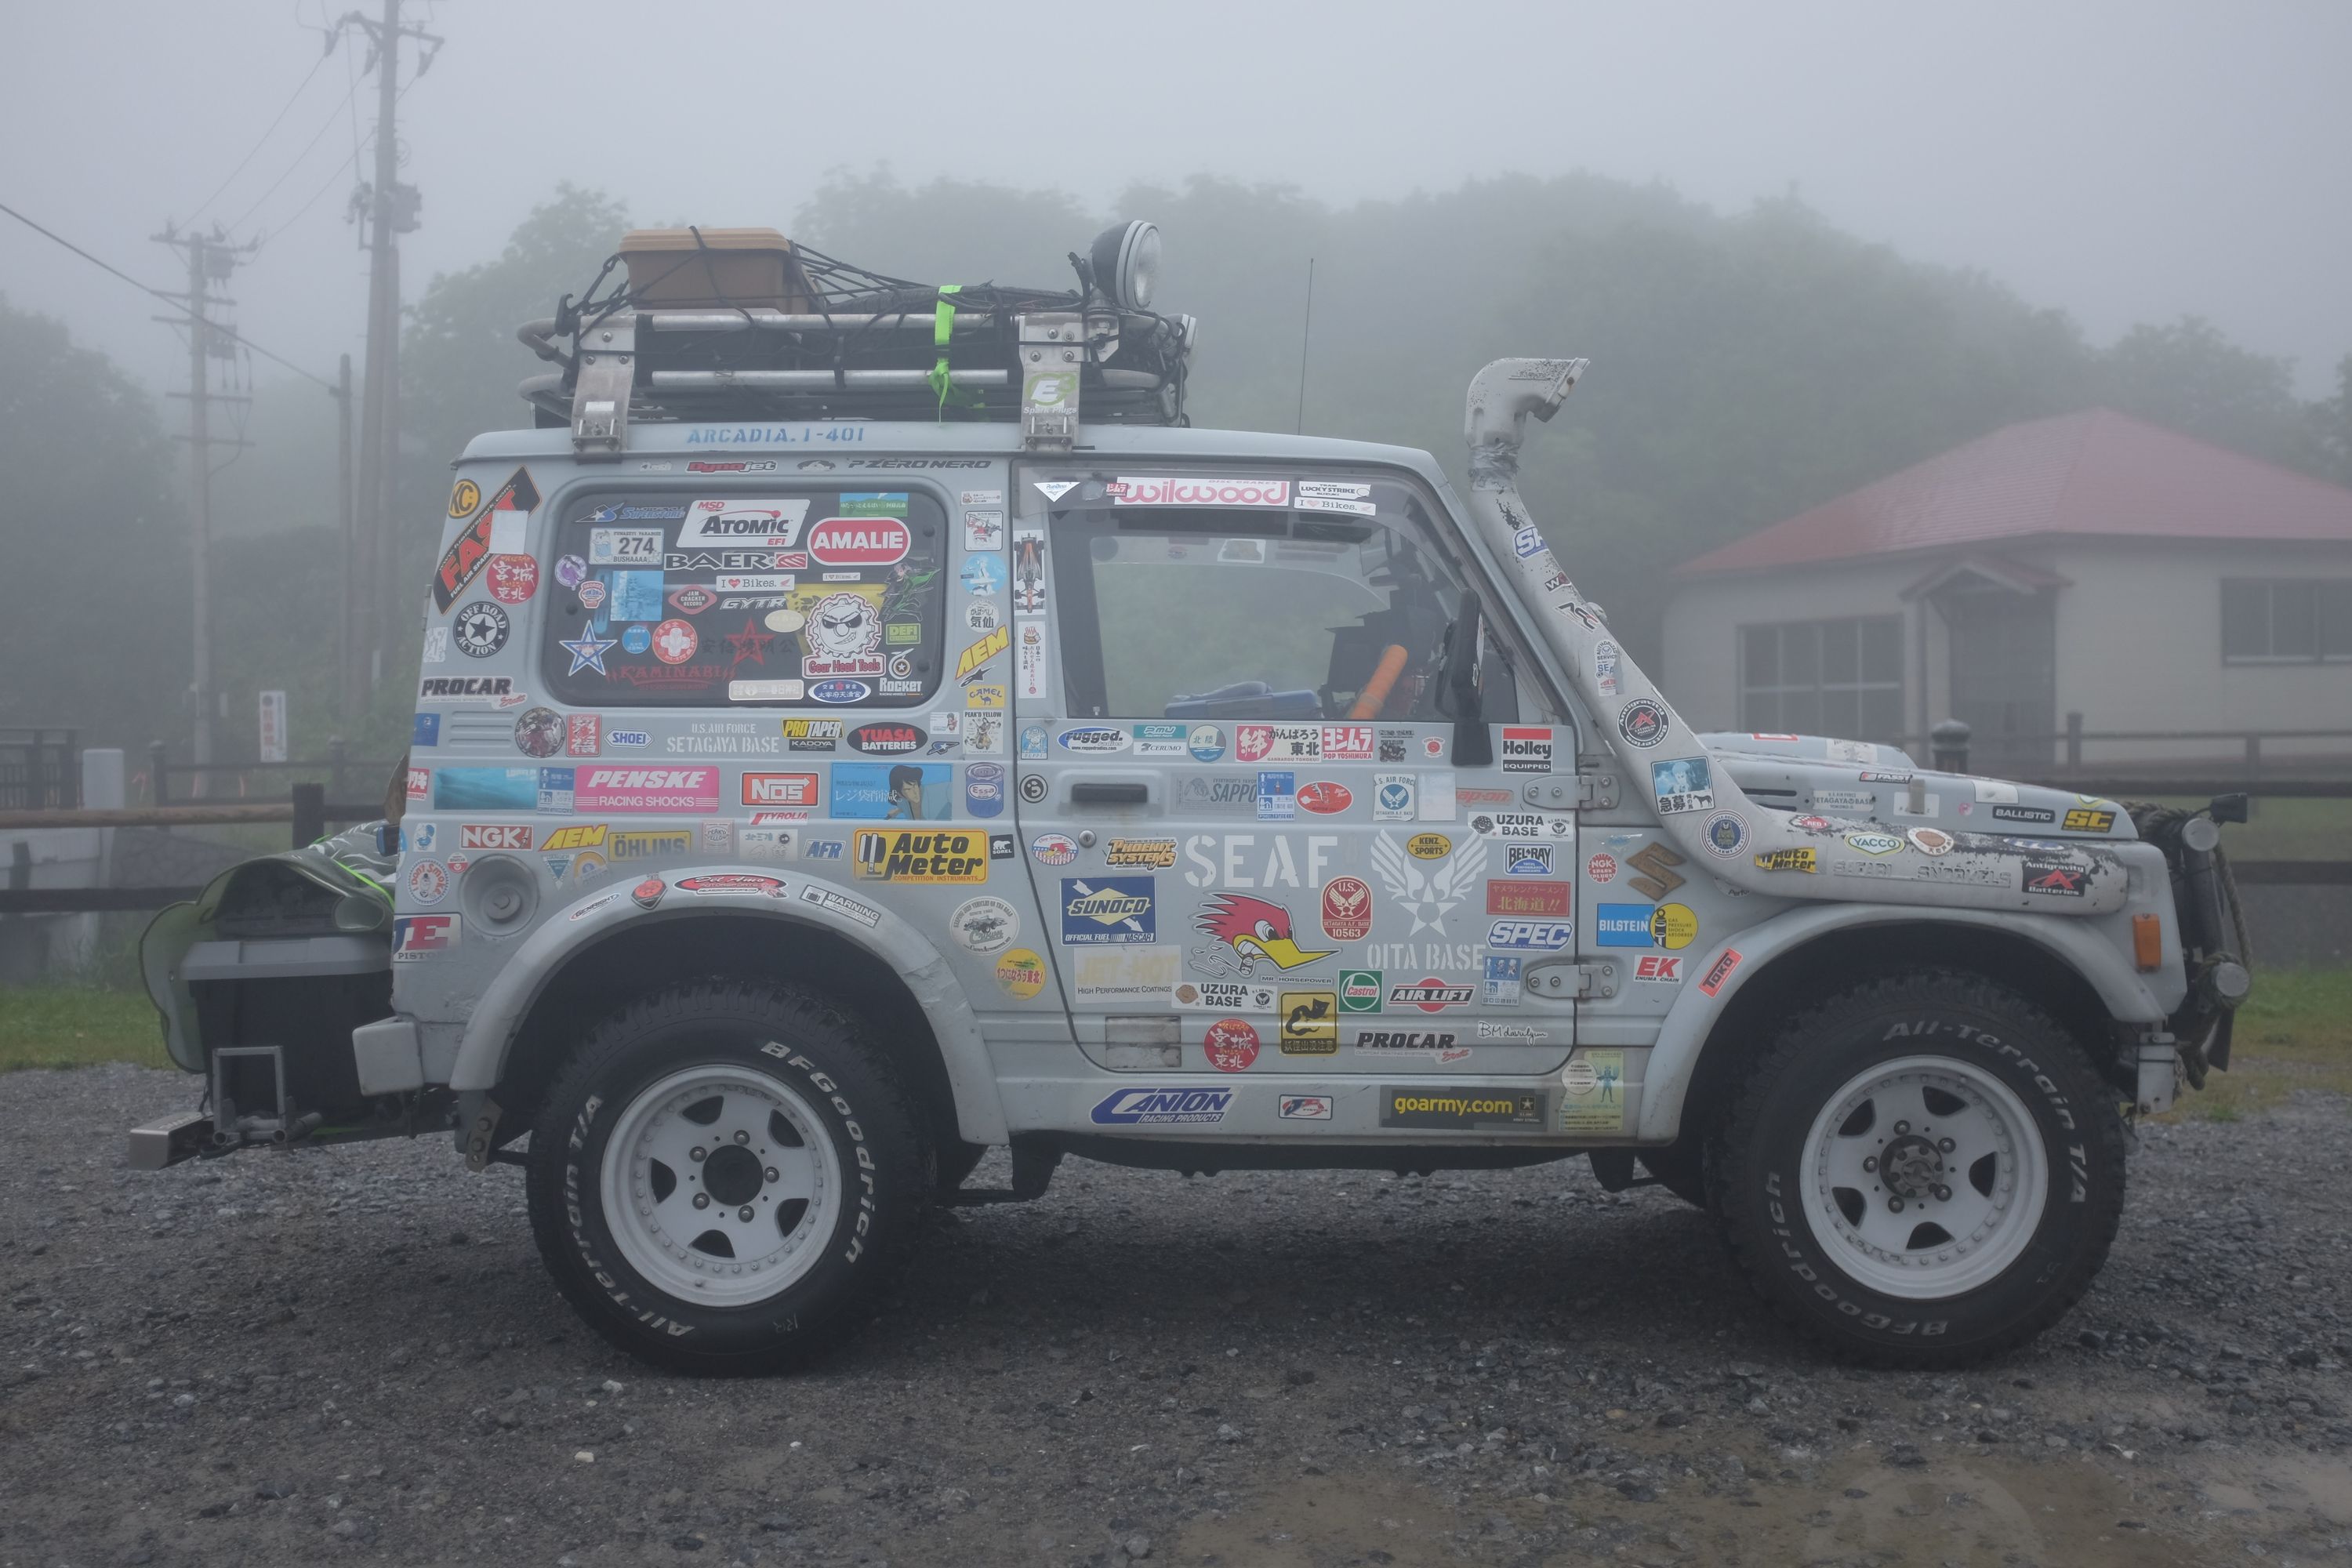 A small grey jeep festooned with stickers parked in the fog.